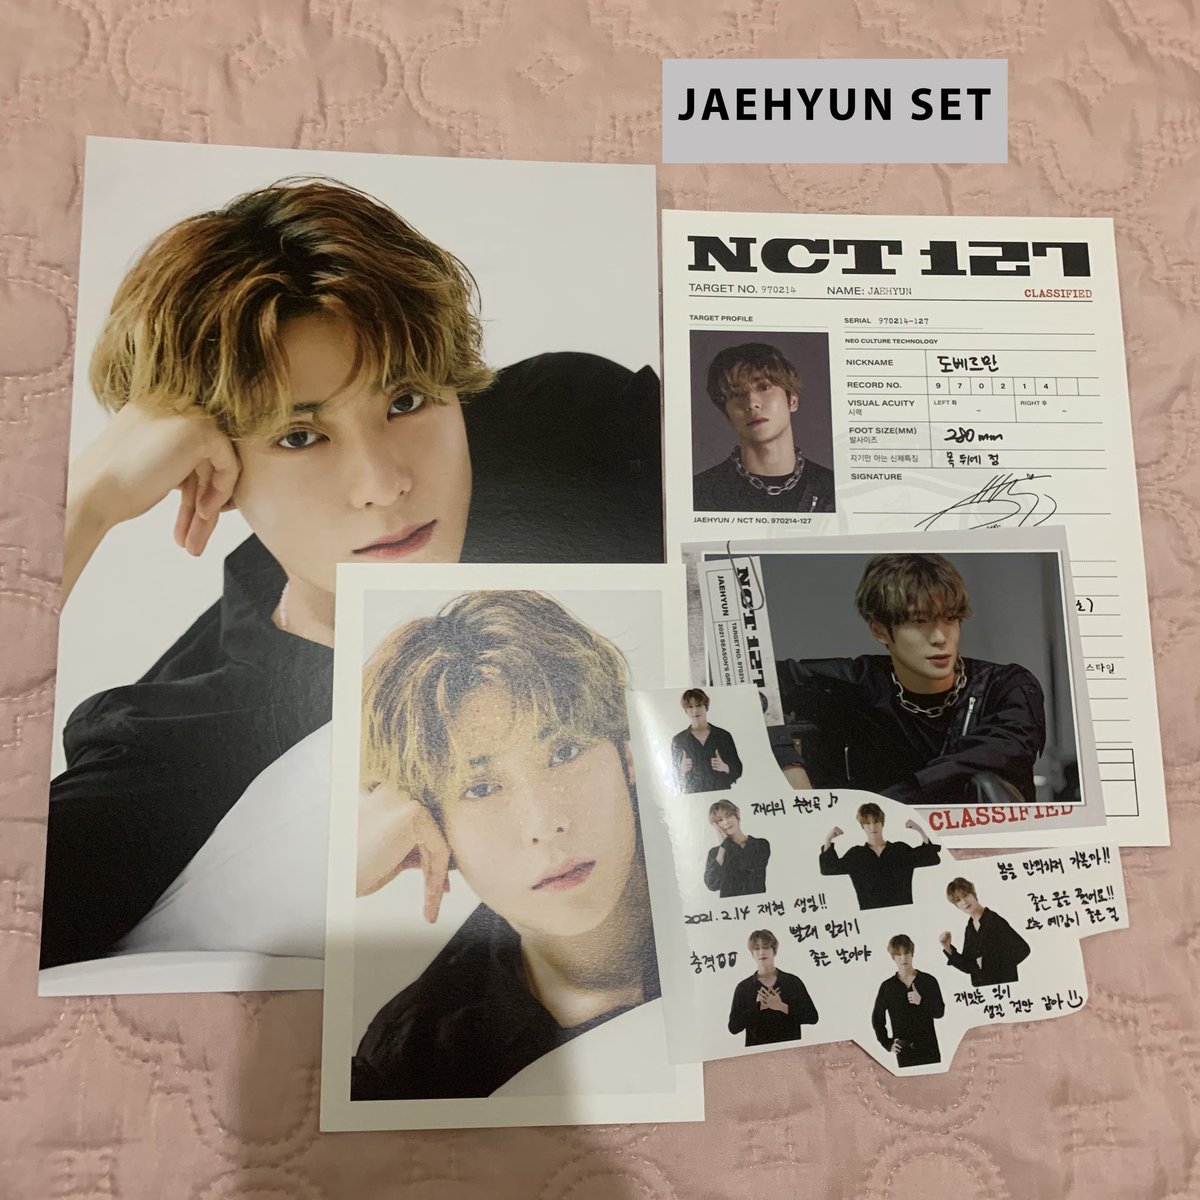 wts lfb ph on hand exo nct rv superm sf9 pc unsealed album postcard posterReply with “mine + code”, or “mine for (@/username) + code”nct 127 sg 2021 a4 poster a4 postcard jaehyun 2g 2021 set taeil johnny taeyong yuta doyoung jaehyun jungwoo mark haechan